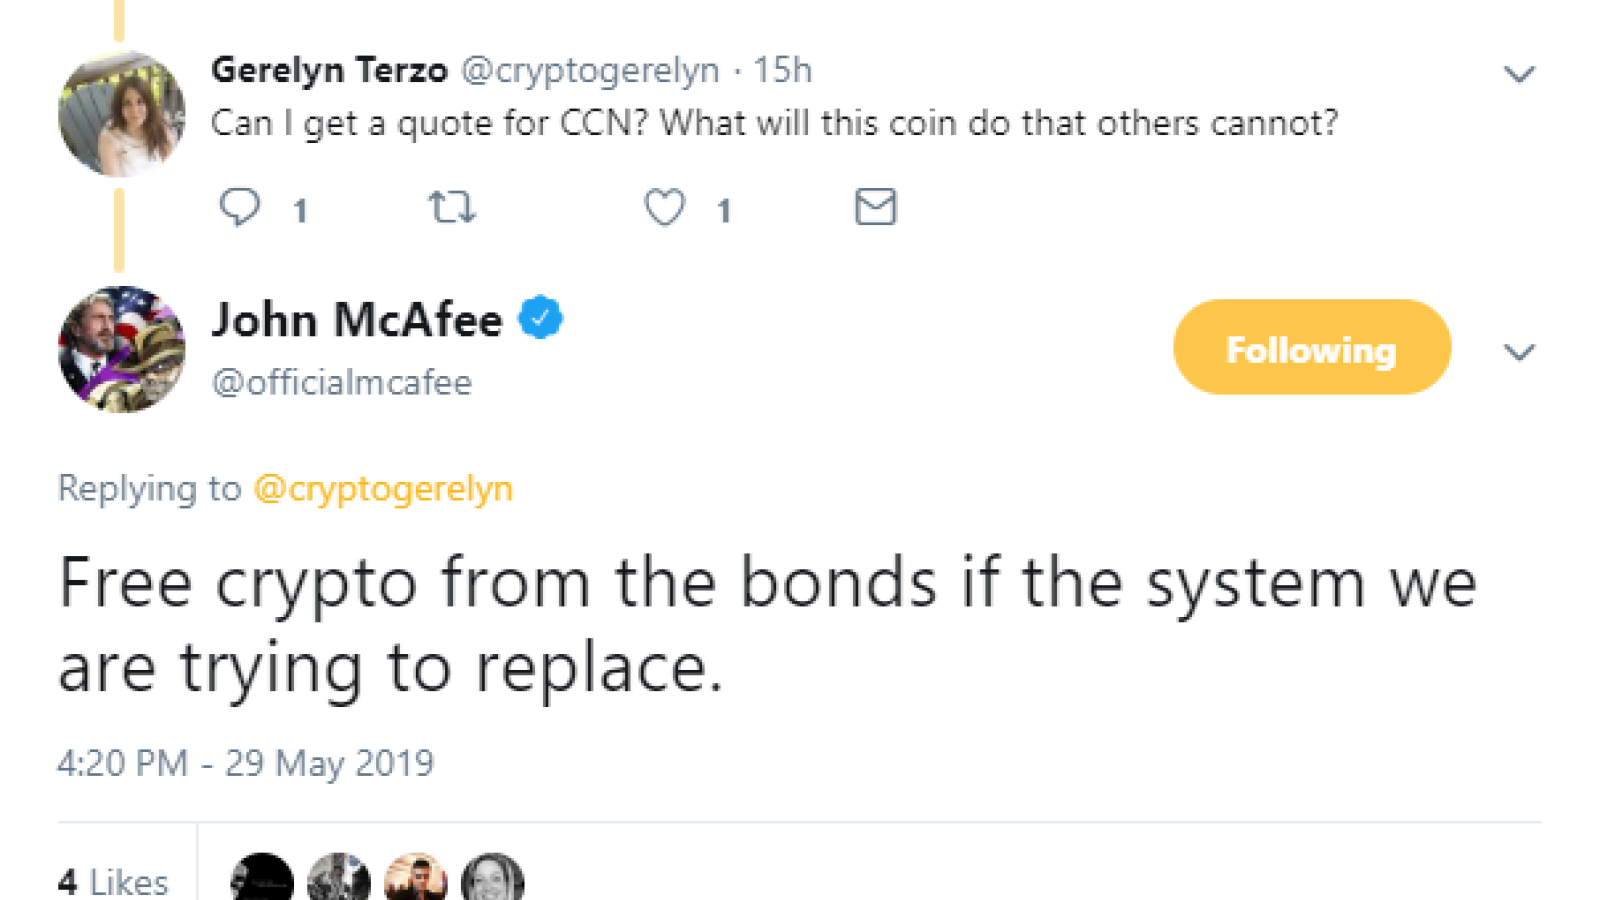 Totally different from other crypto